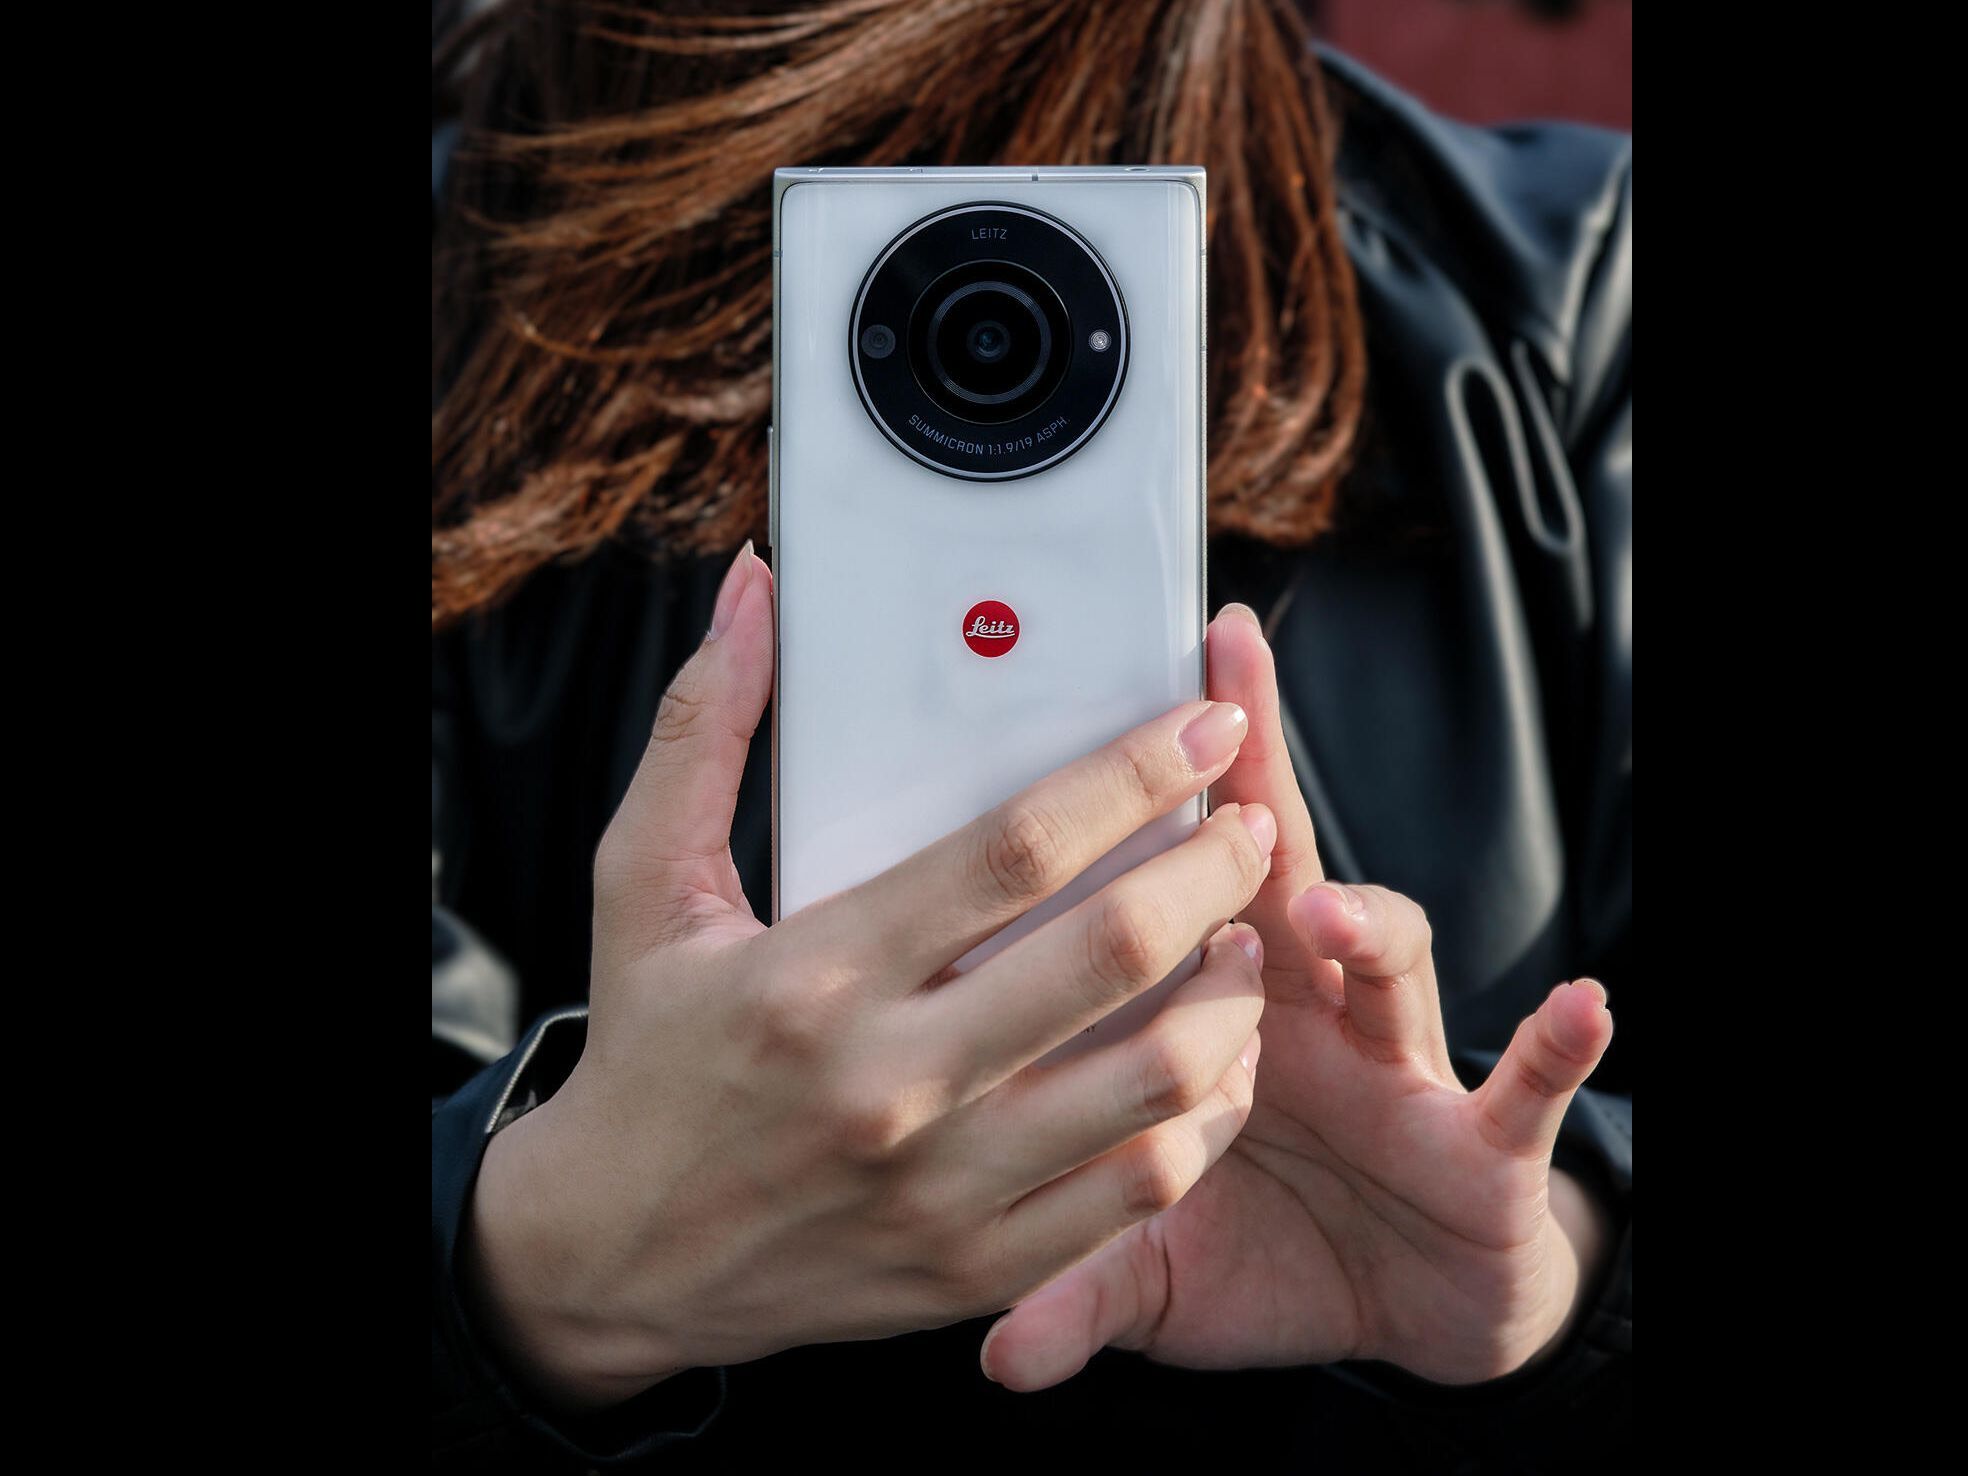 The single-camera setup helps sell the camera feel, even though it may seem outdated. - Professional photography goes mobile again with Leica’s Leitz 2, released in Japan